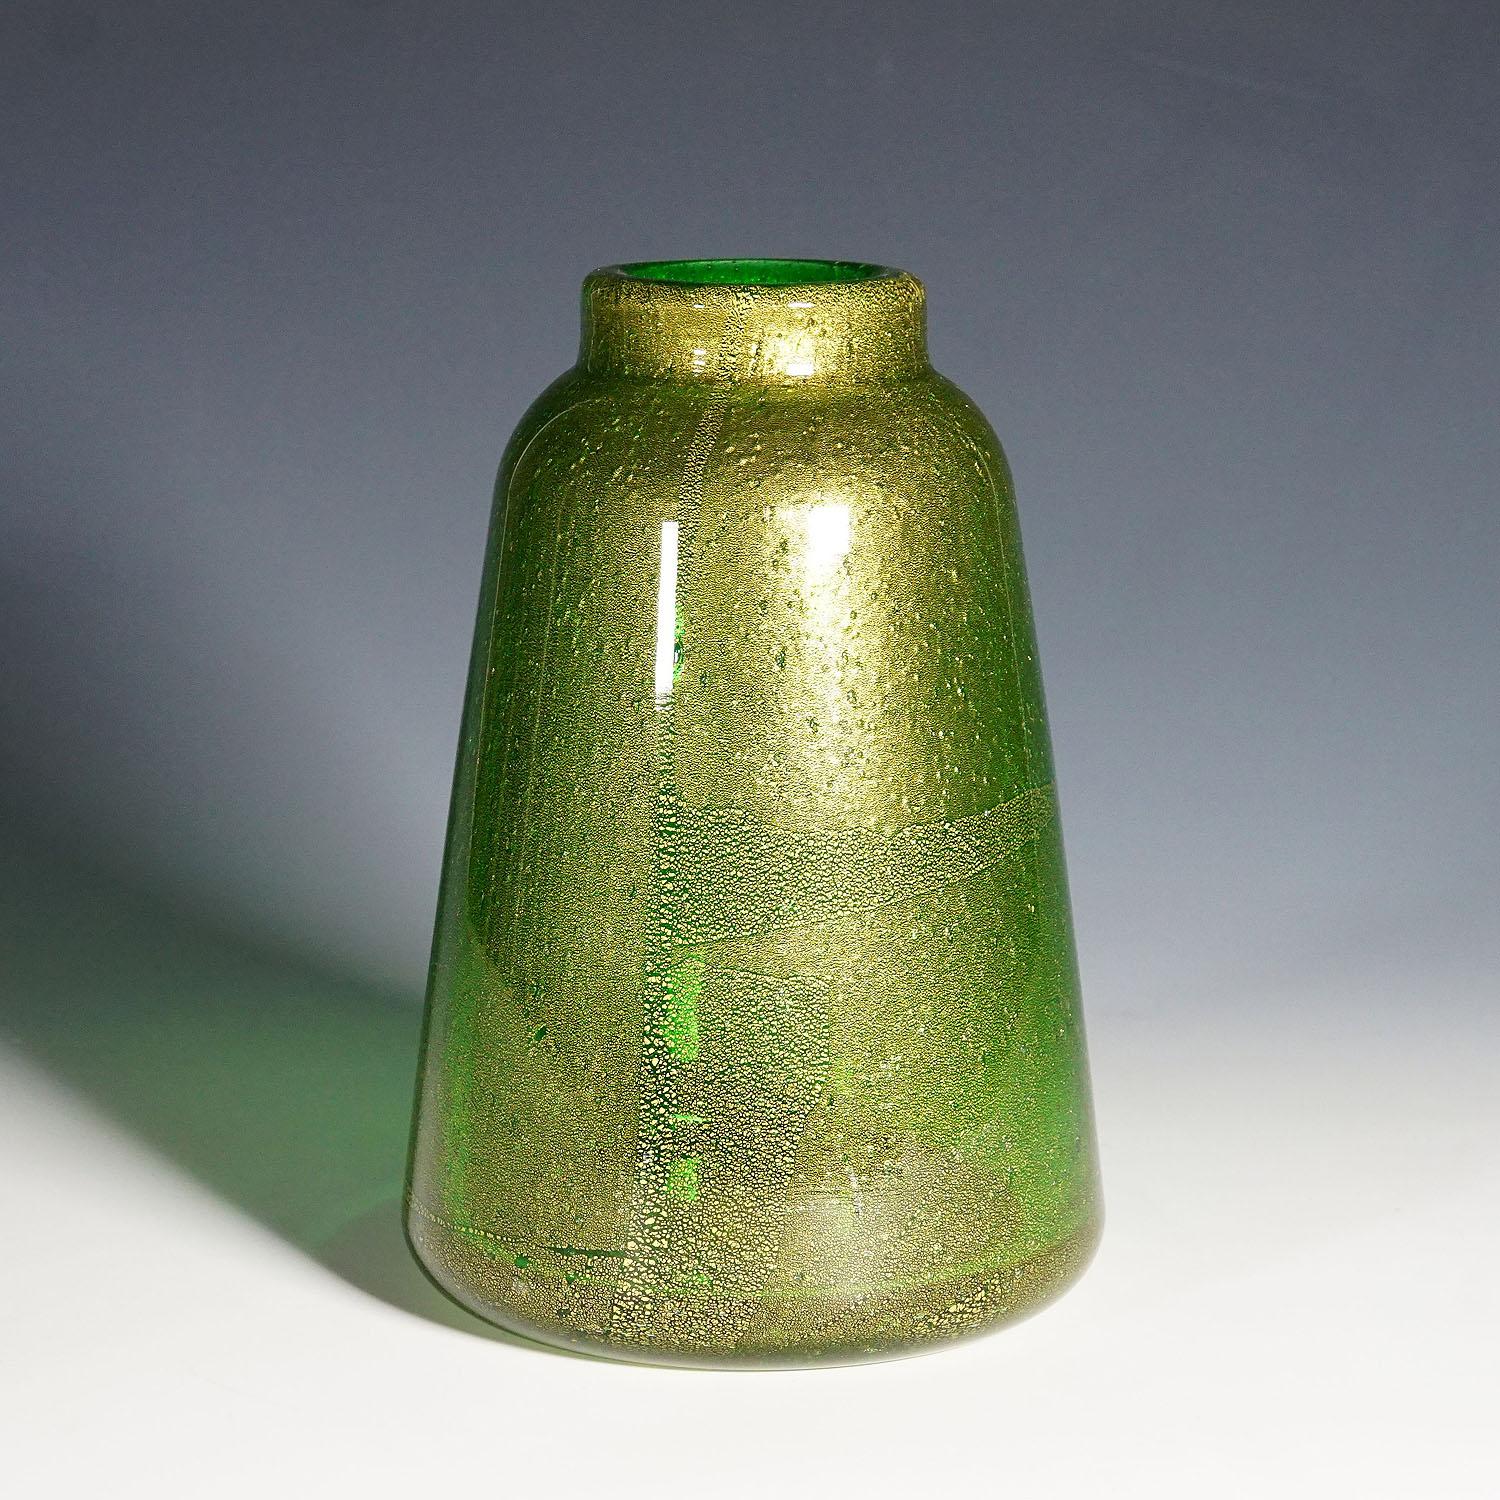 Heavy Vetro Sommerso Vase by Carlo Scarpa for Venini Murano ca. 1930s

A vetro sommerso bollicine vase designed by Carlo Scarpa between 1934 and 1936. Manufactured by Venini Murano Venice in the 1930s. Thick green glass with multiple air bubbles and